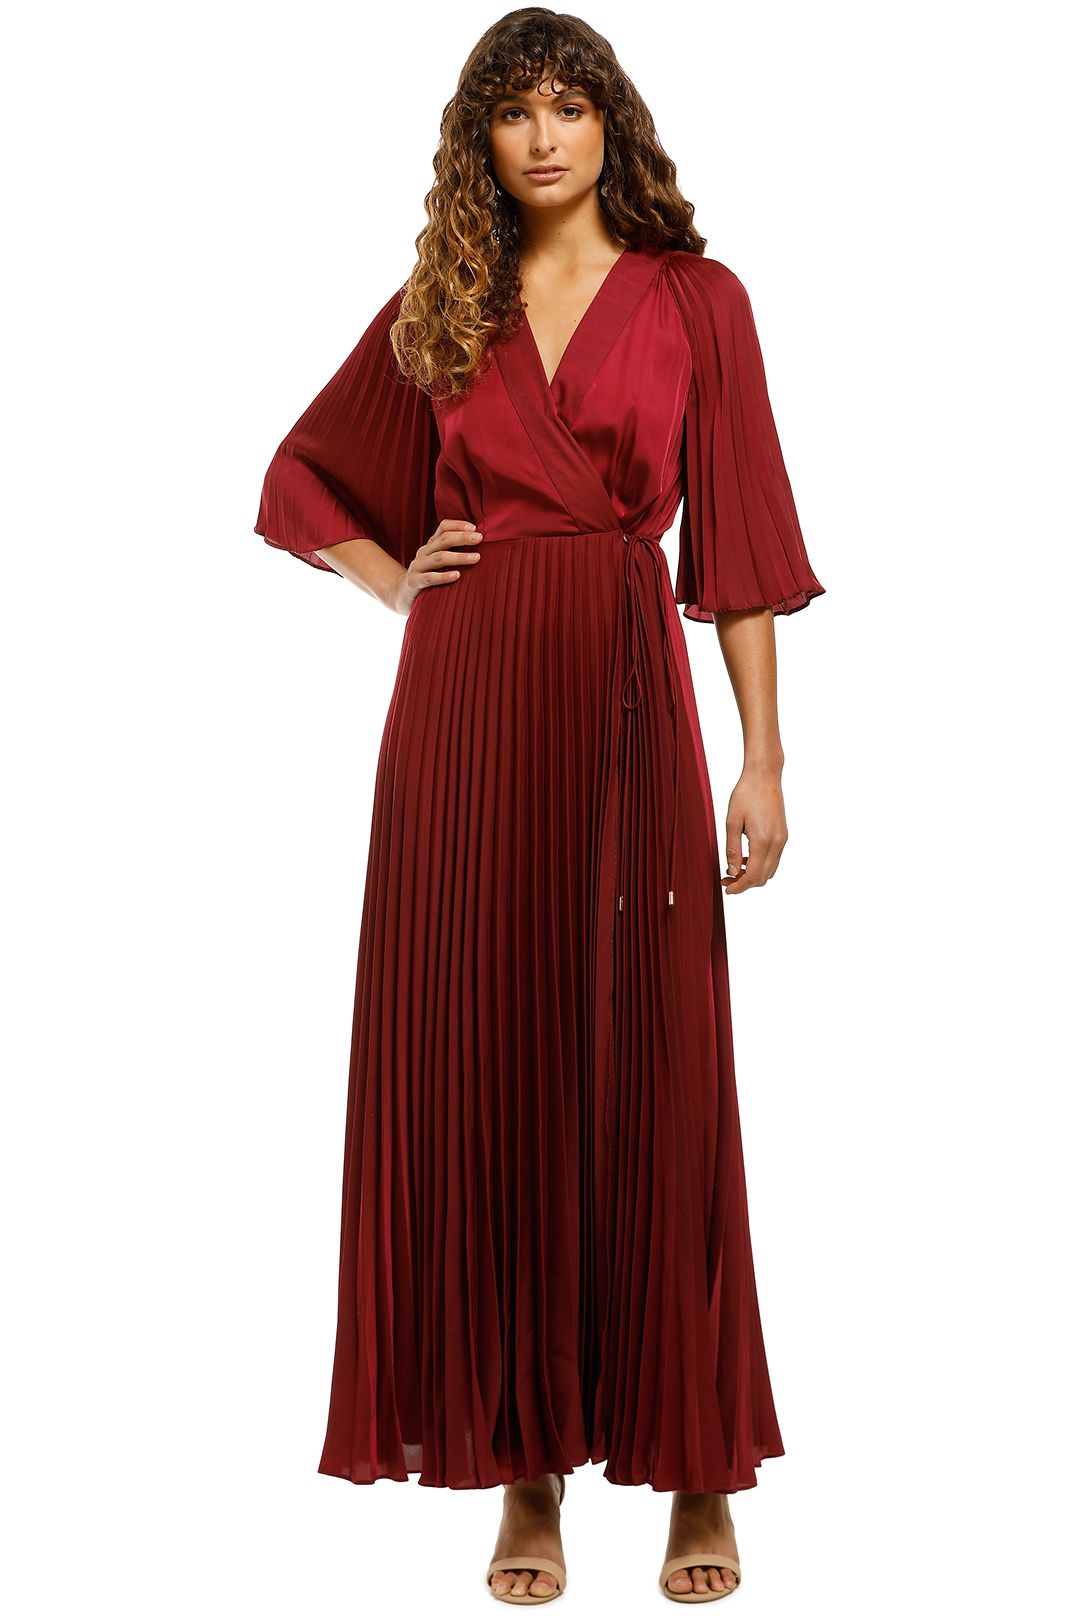 Tempera Wrap Gown by Ginger and Smart for Hire | GlamCorner